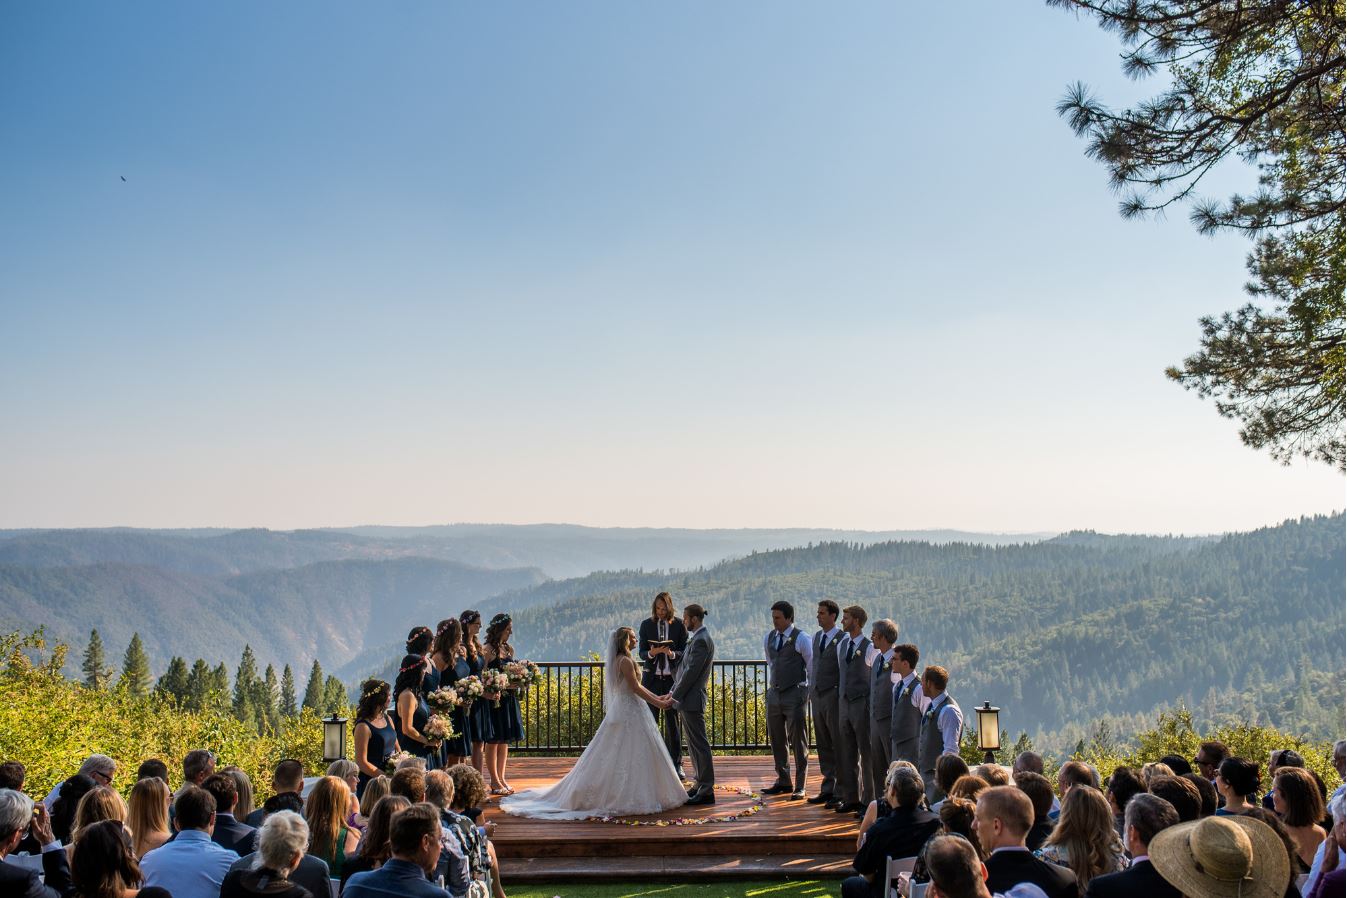 A wedding on a deck with a mountain view in the background.